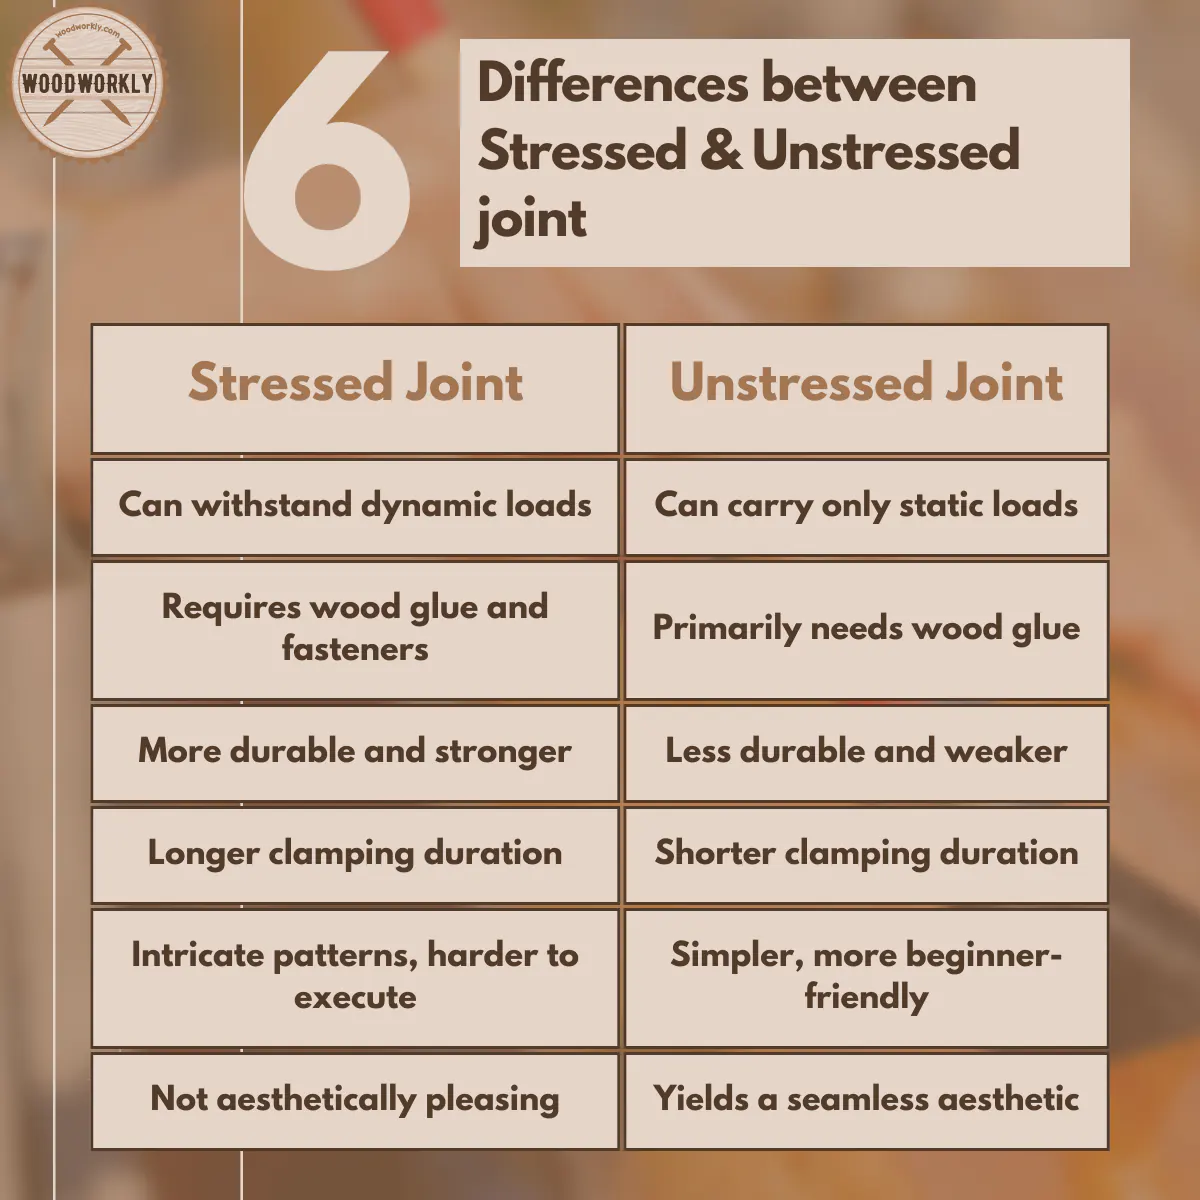 Differences between stressed and unstressed joint.